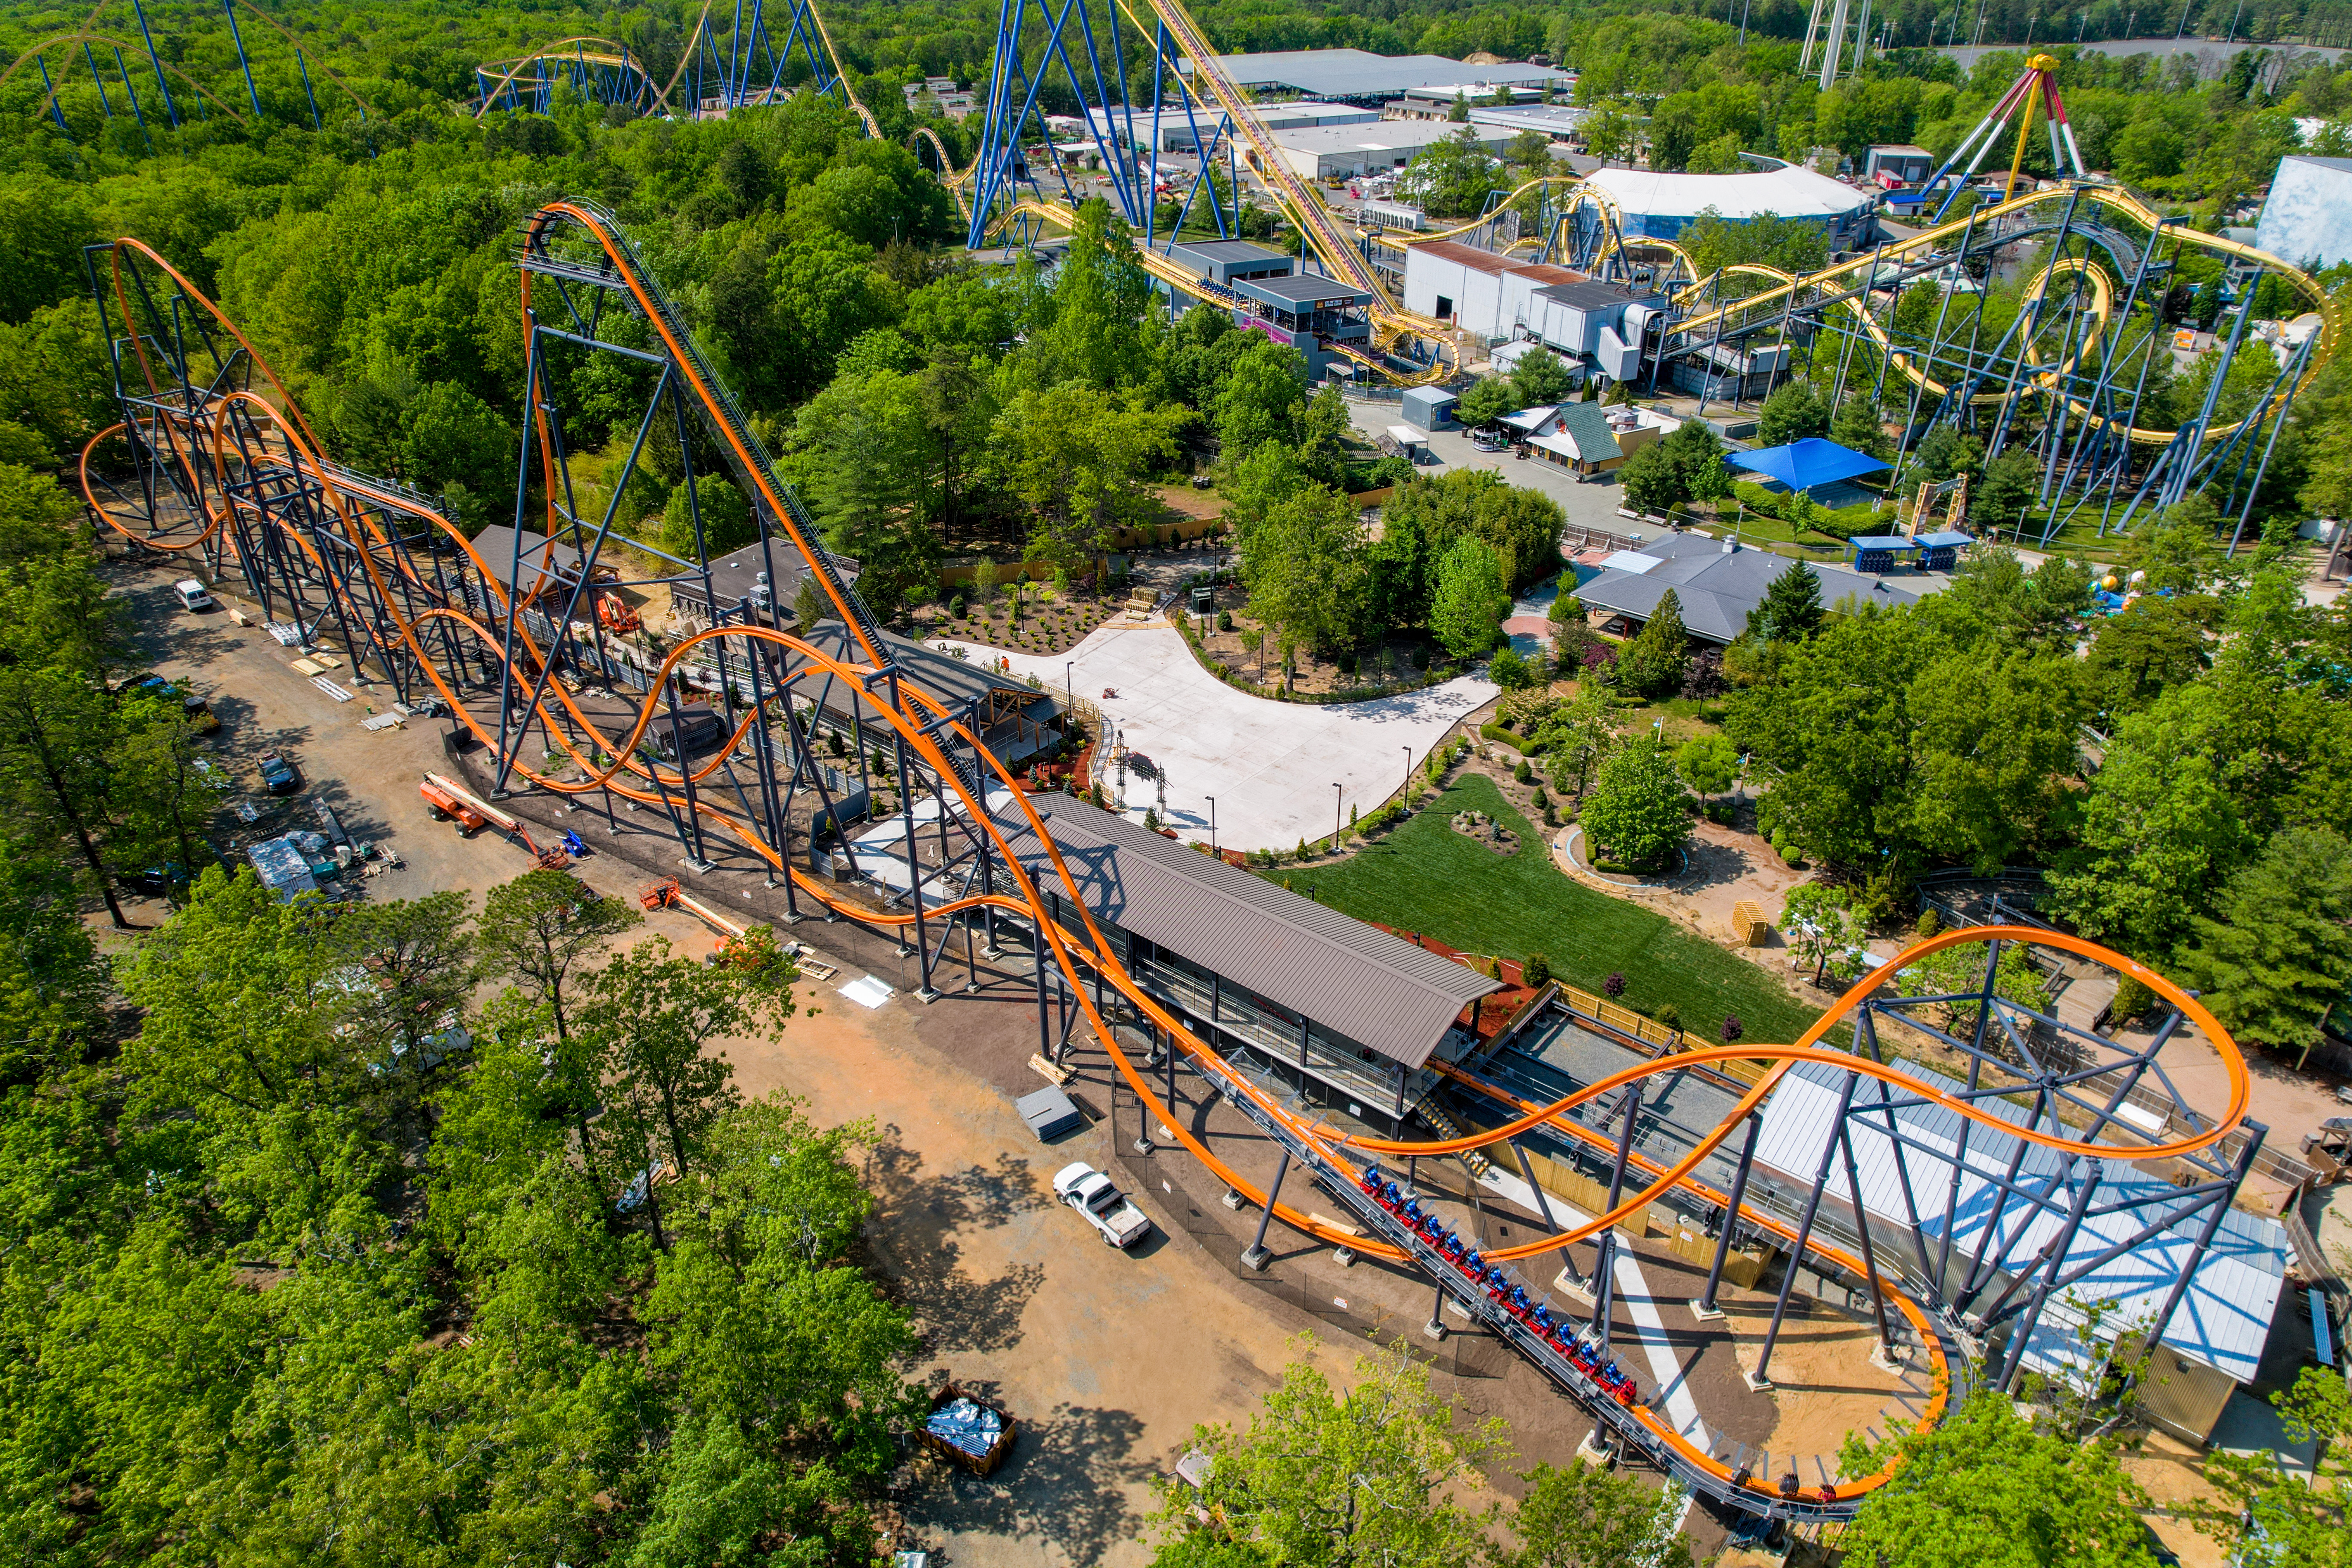 Jersey Devil Coaster, Six Flags Great Adventure] What is your most